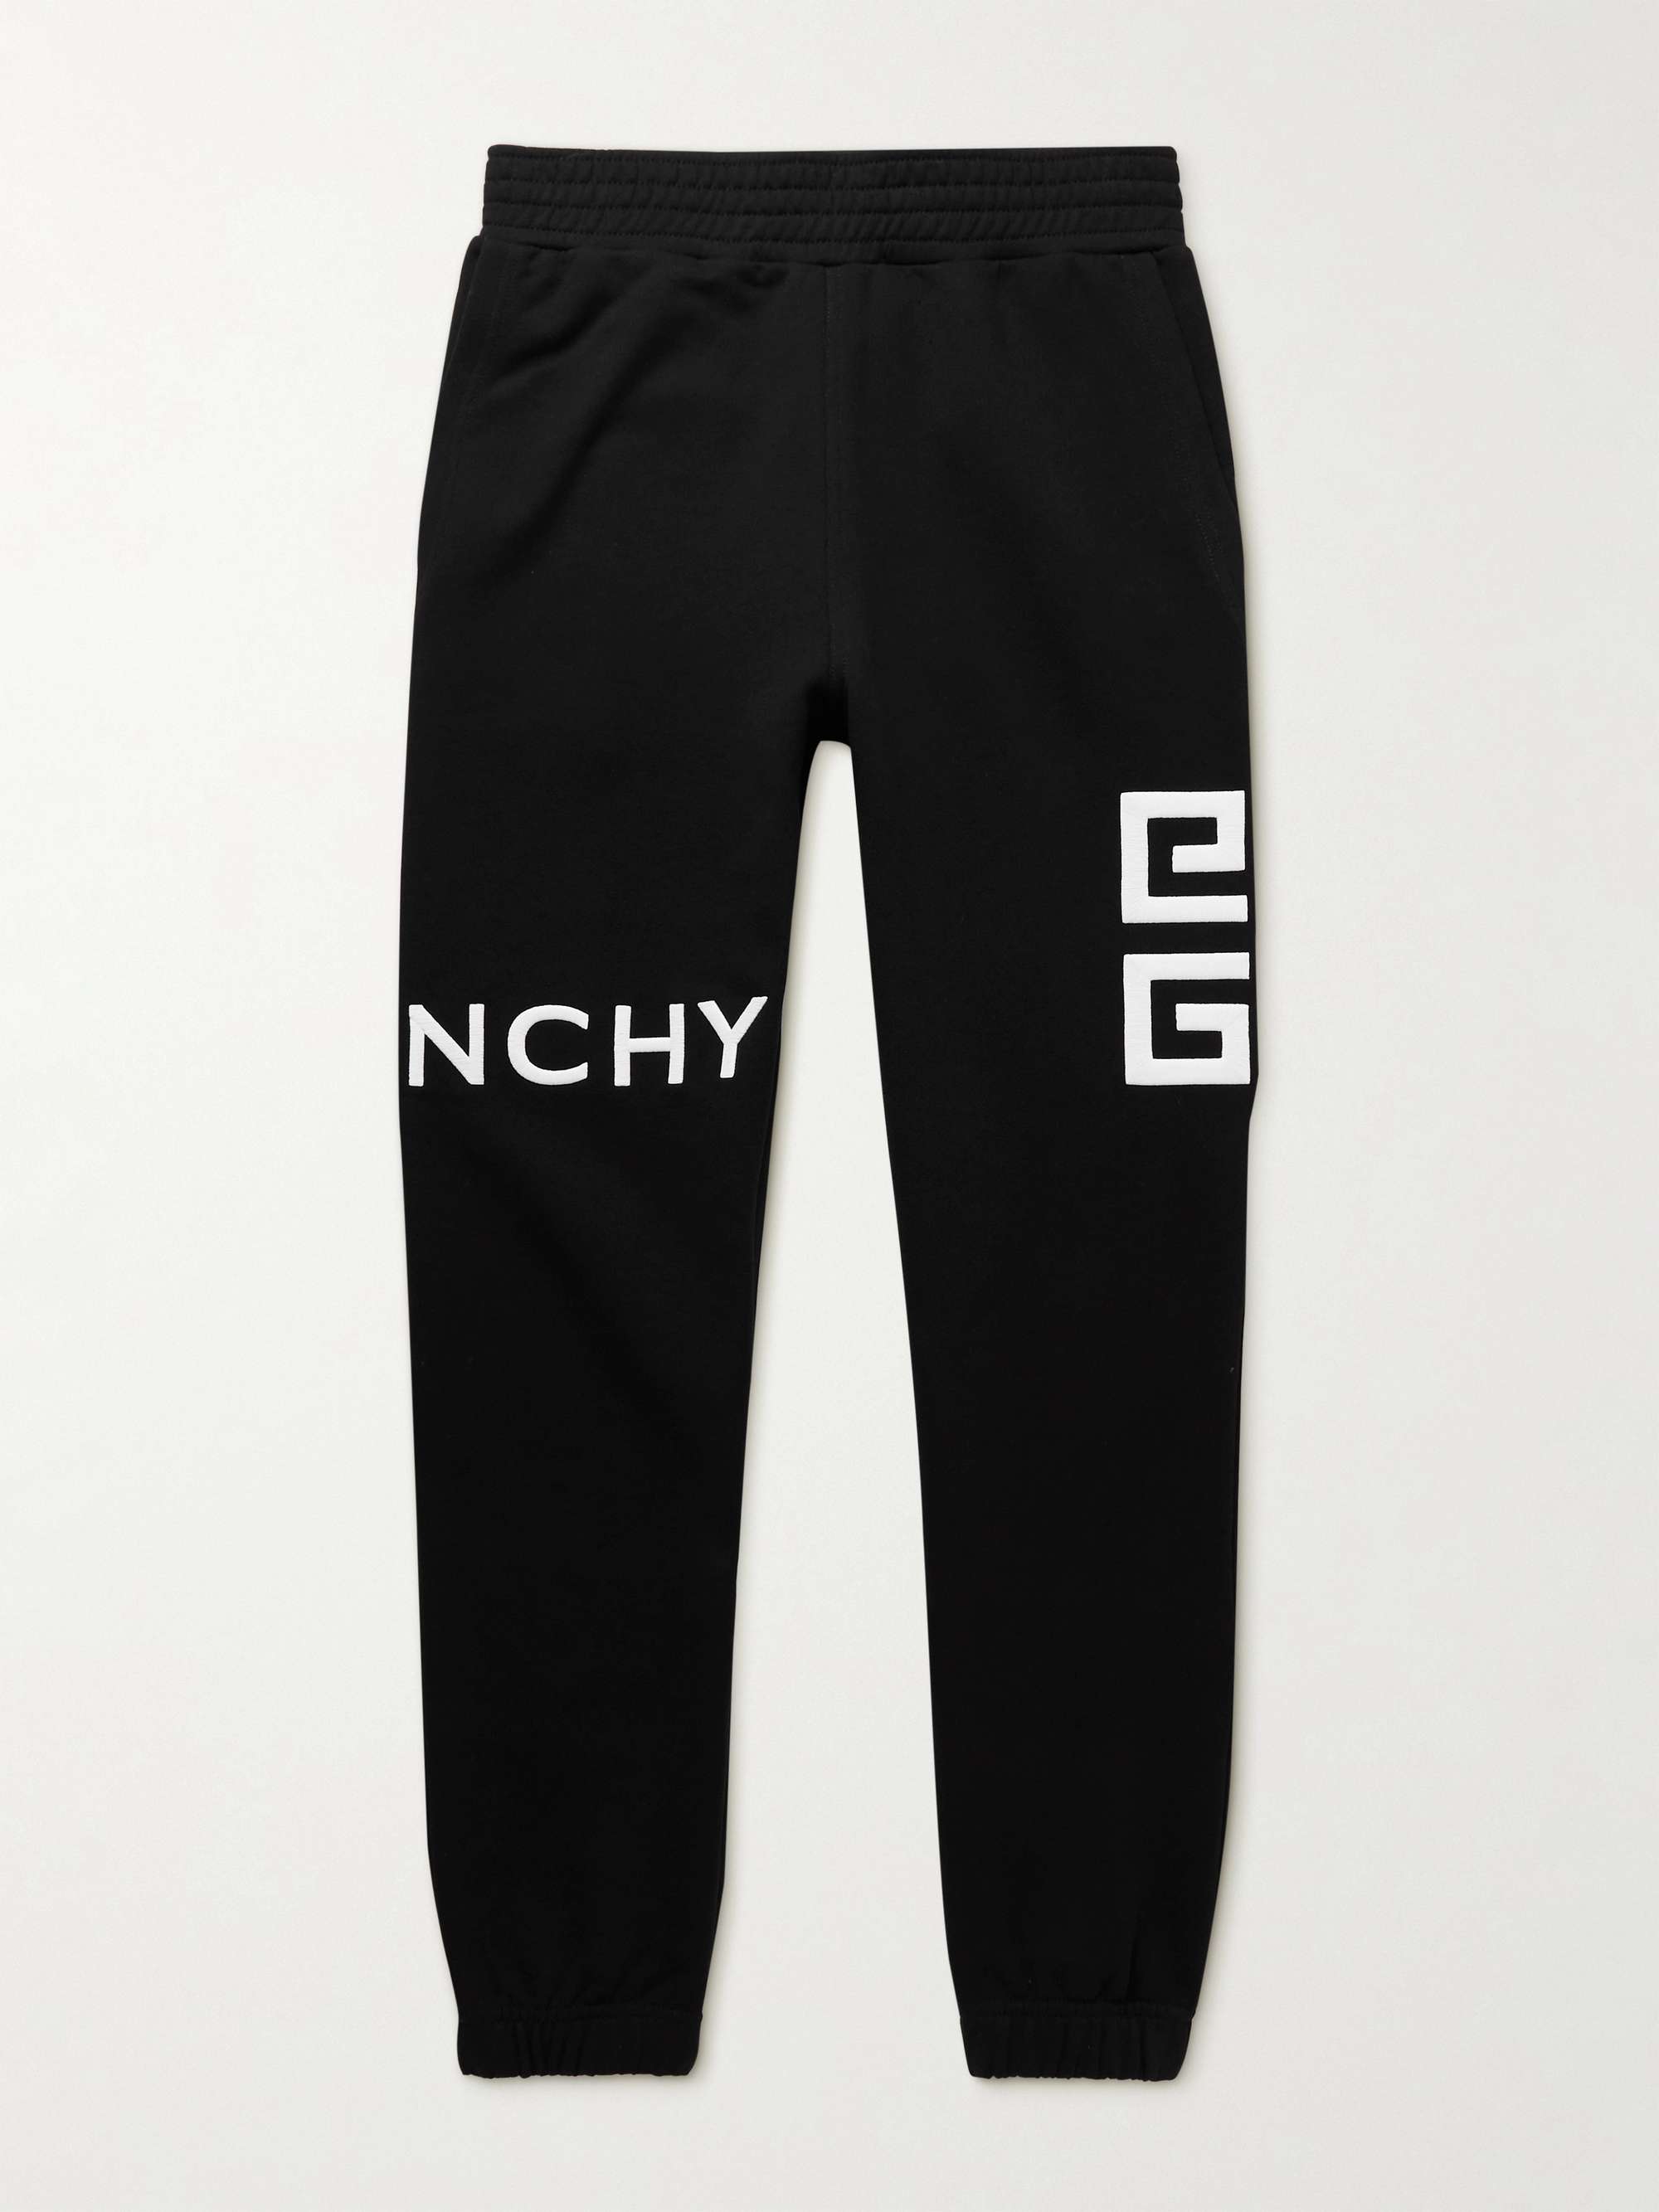 GIVENCHY Slim-Fit Logo-Embroidered Cotton-Jersey Sweatpants